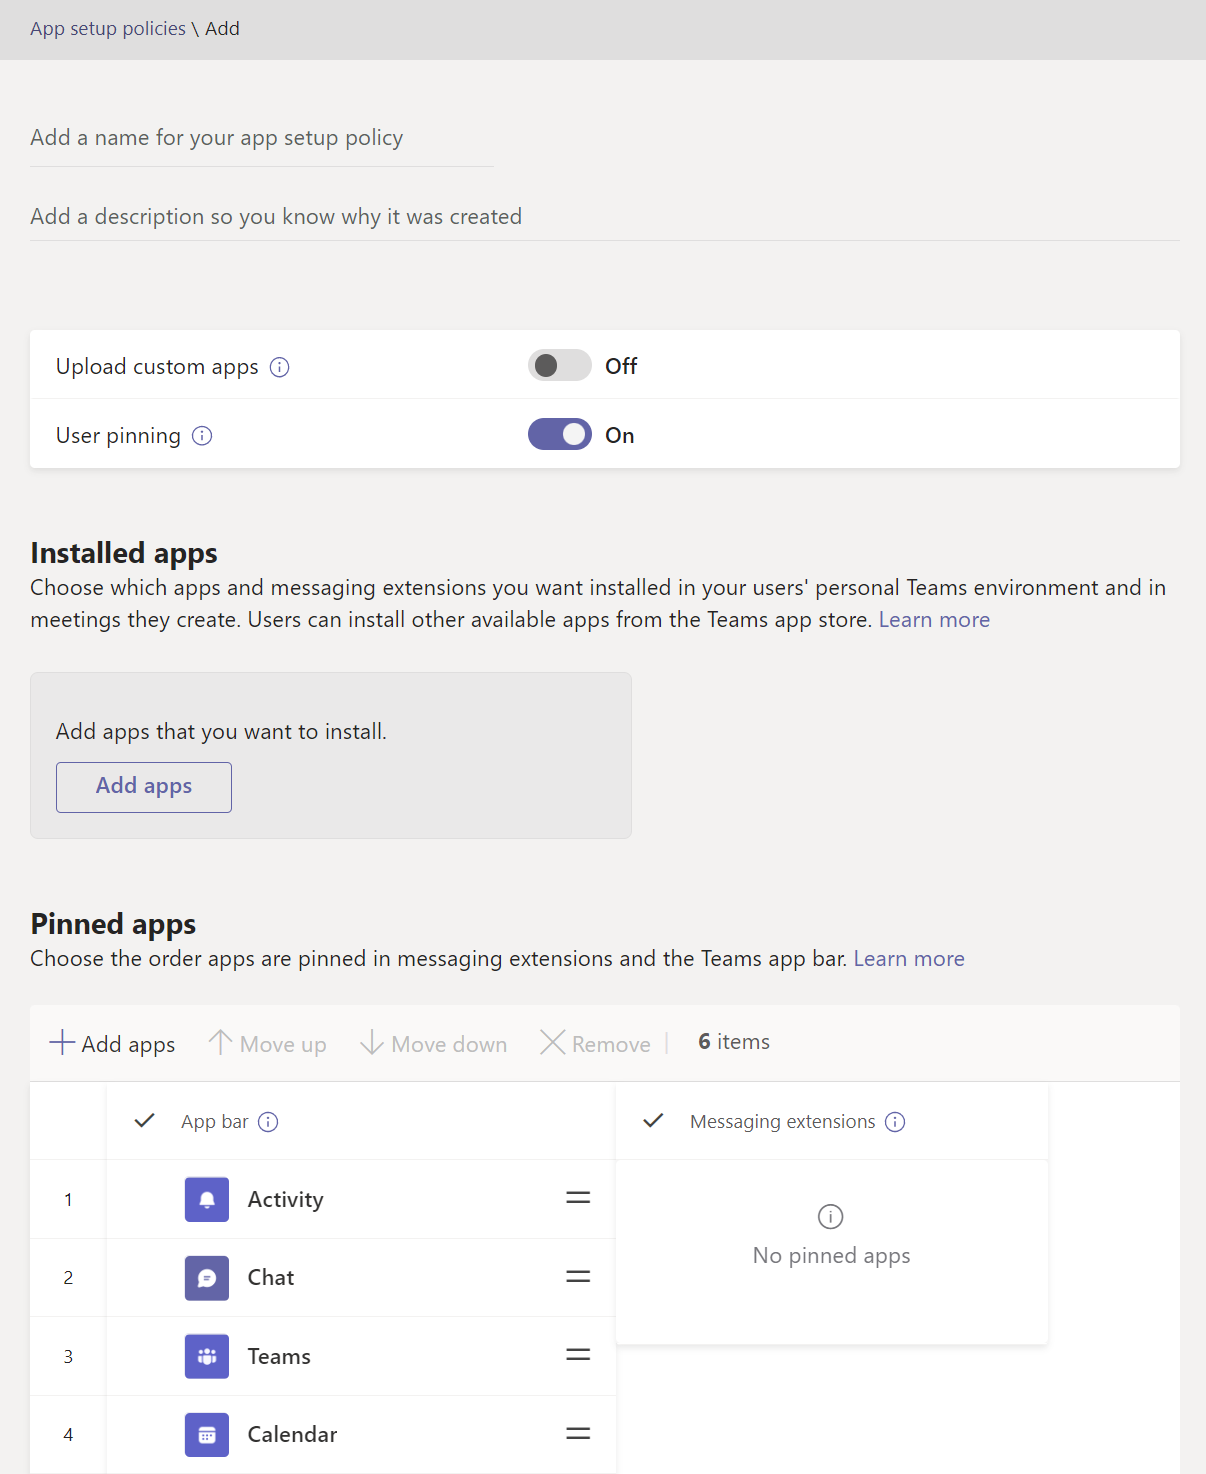  Screenshot showing the Added app setup policies page.